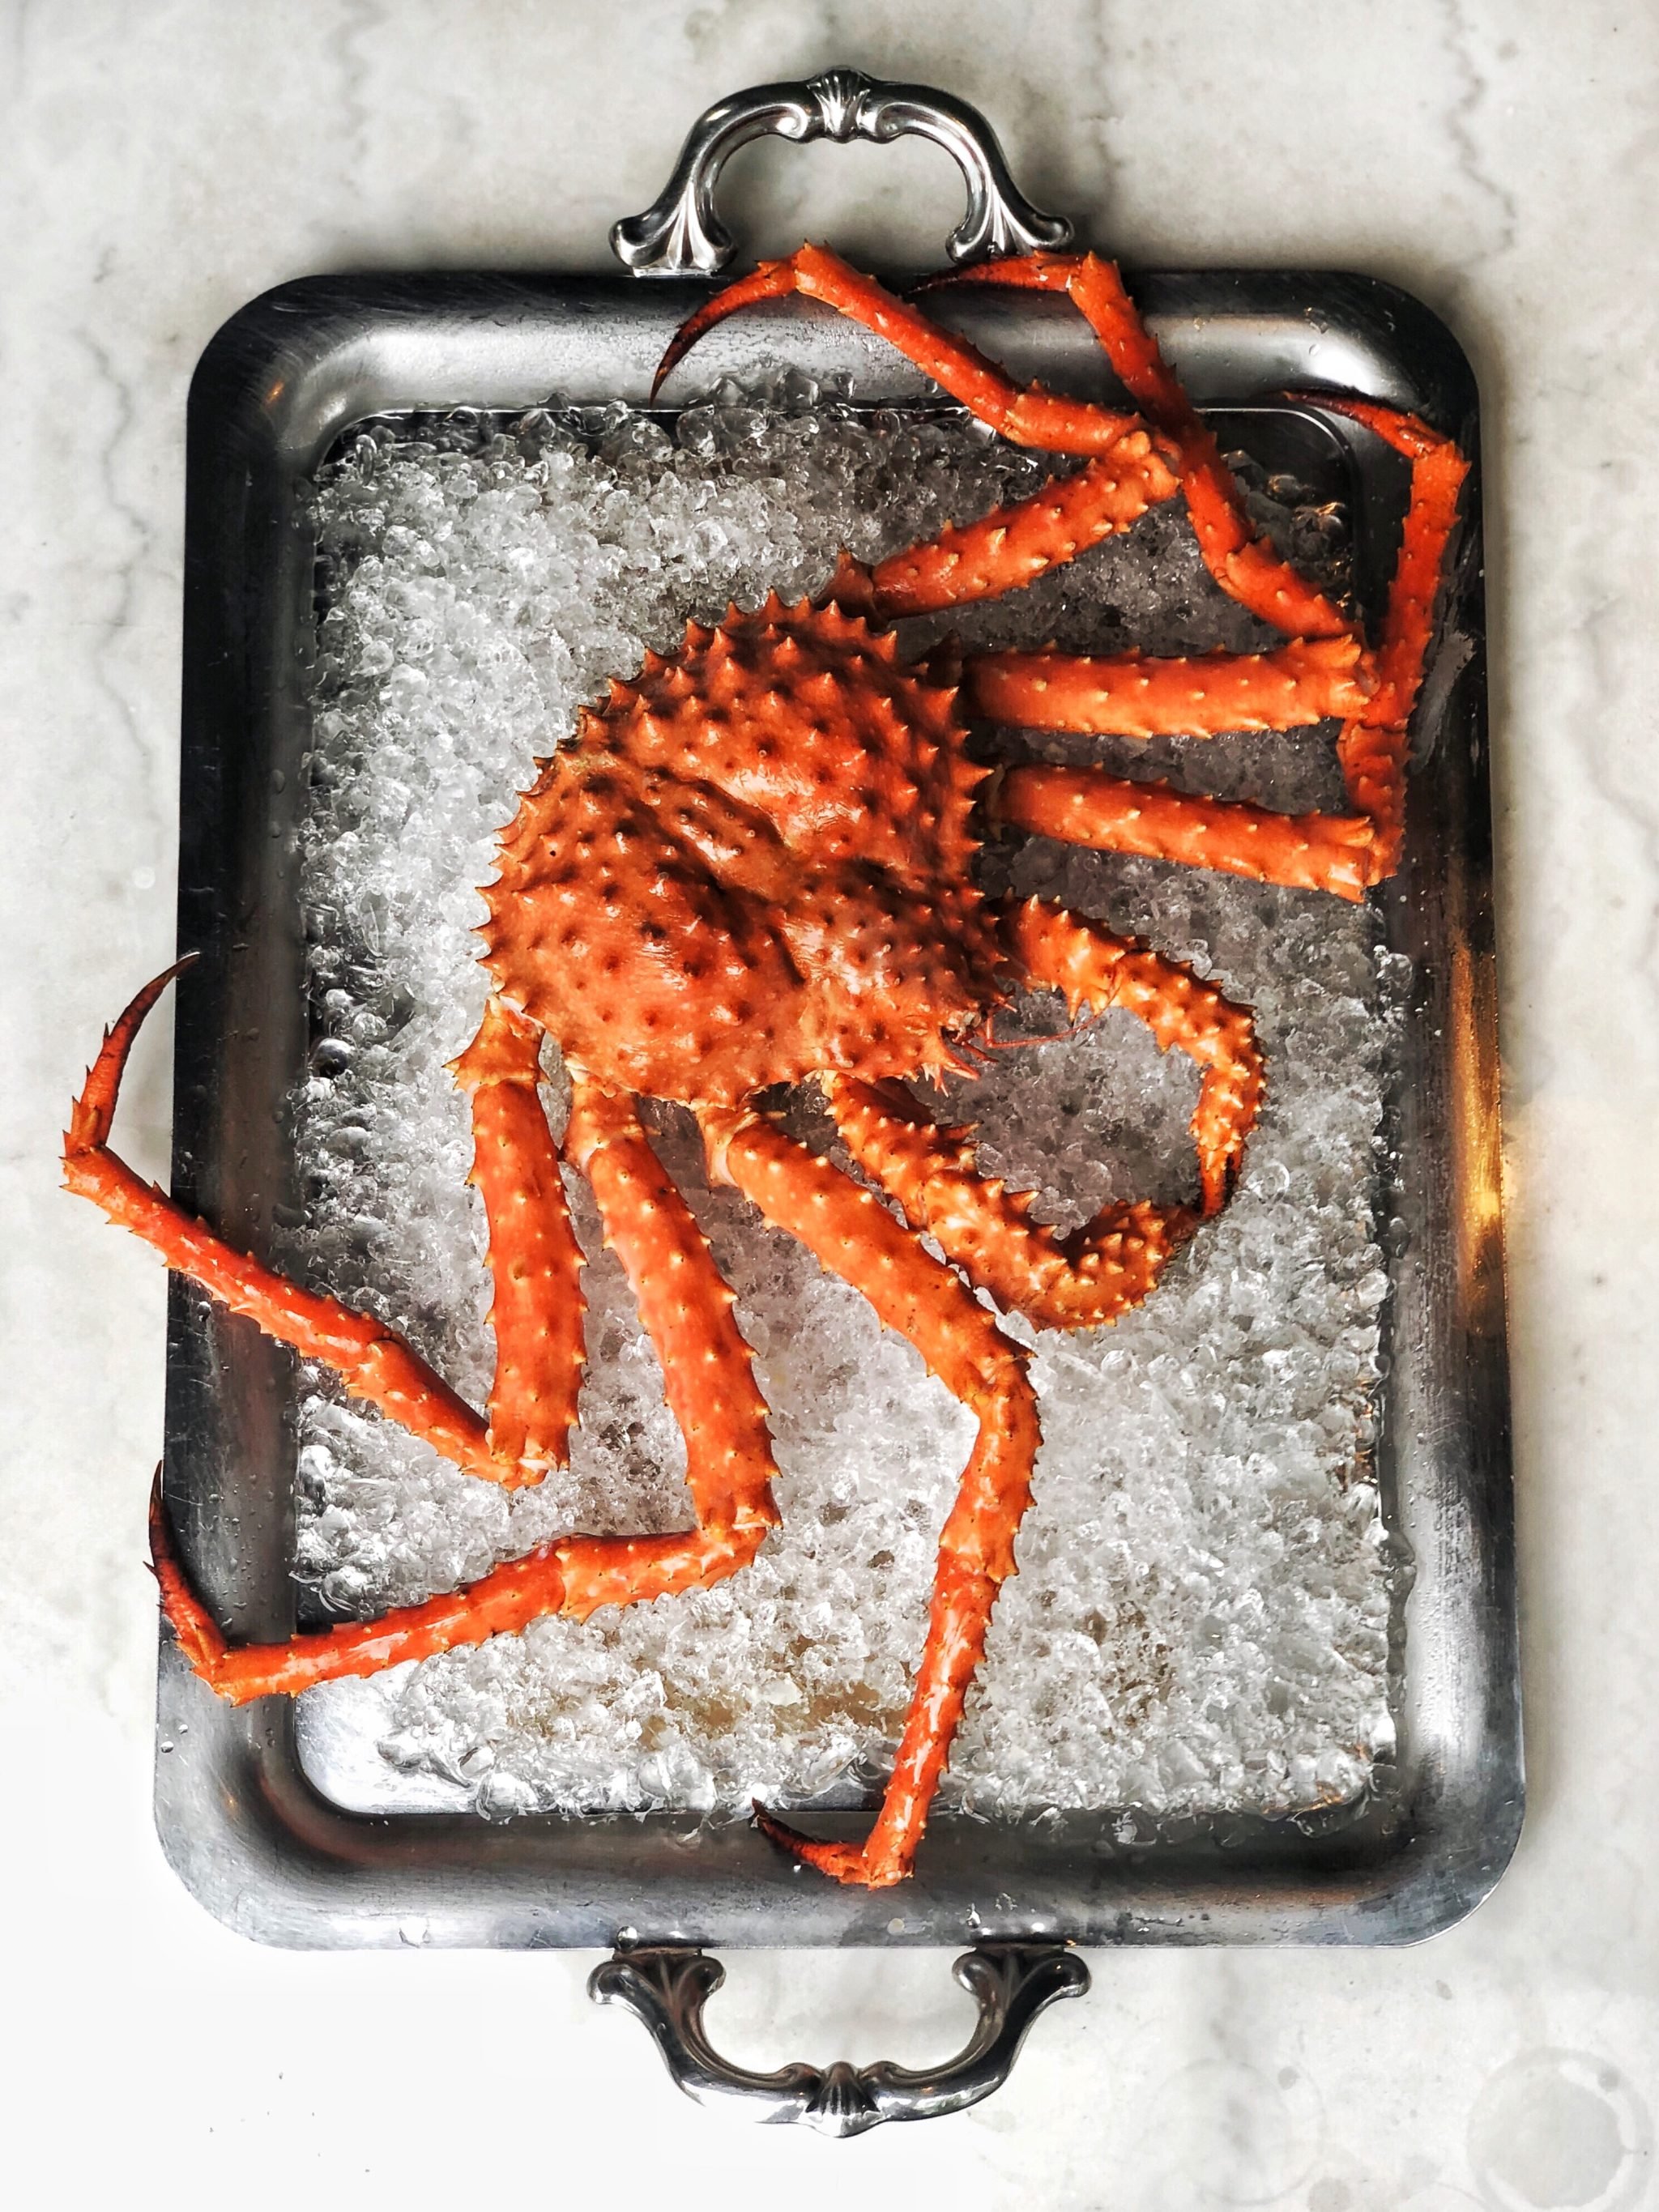 Crab is on the menu for RPM Italian's feast. Photograph by Anthony Colucci.